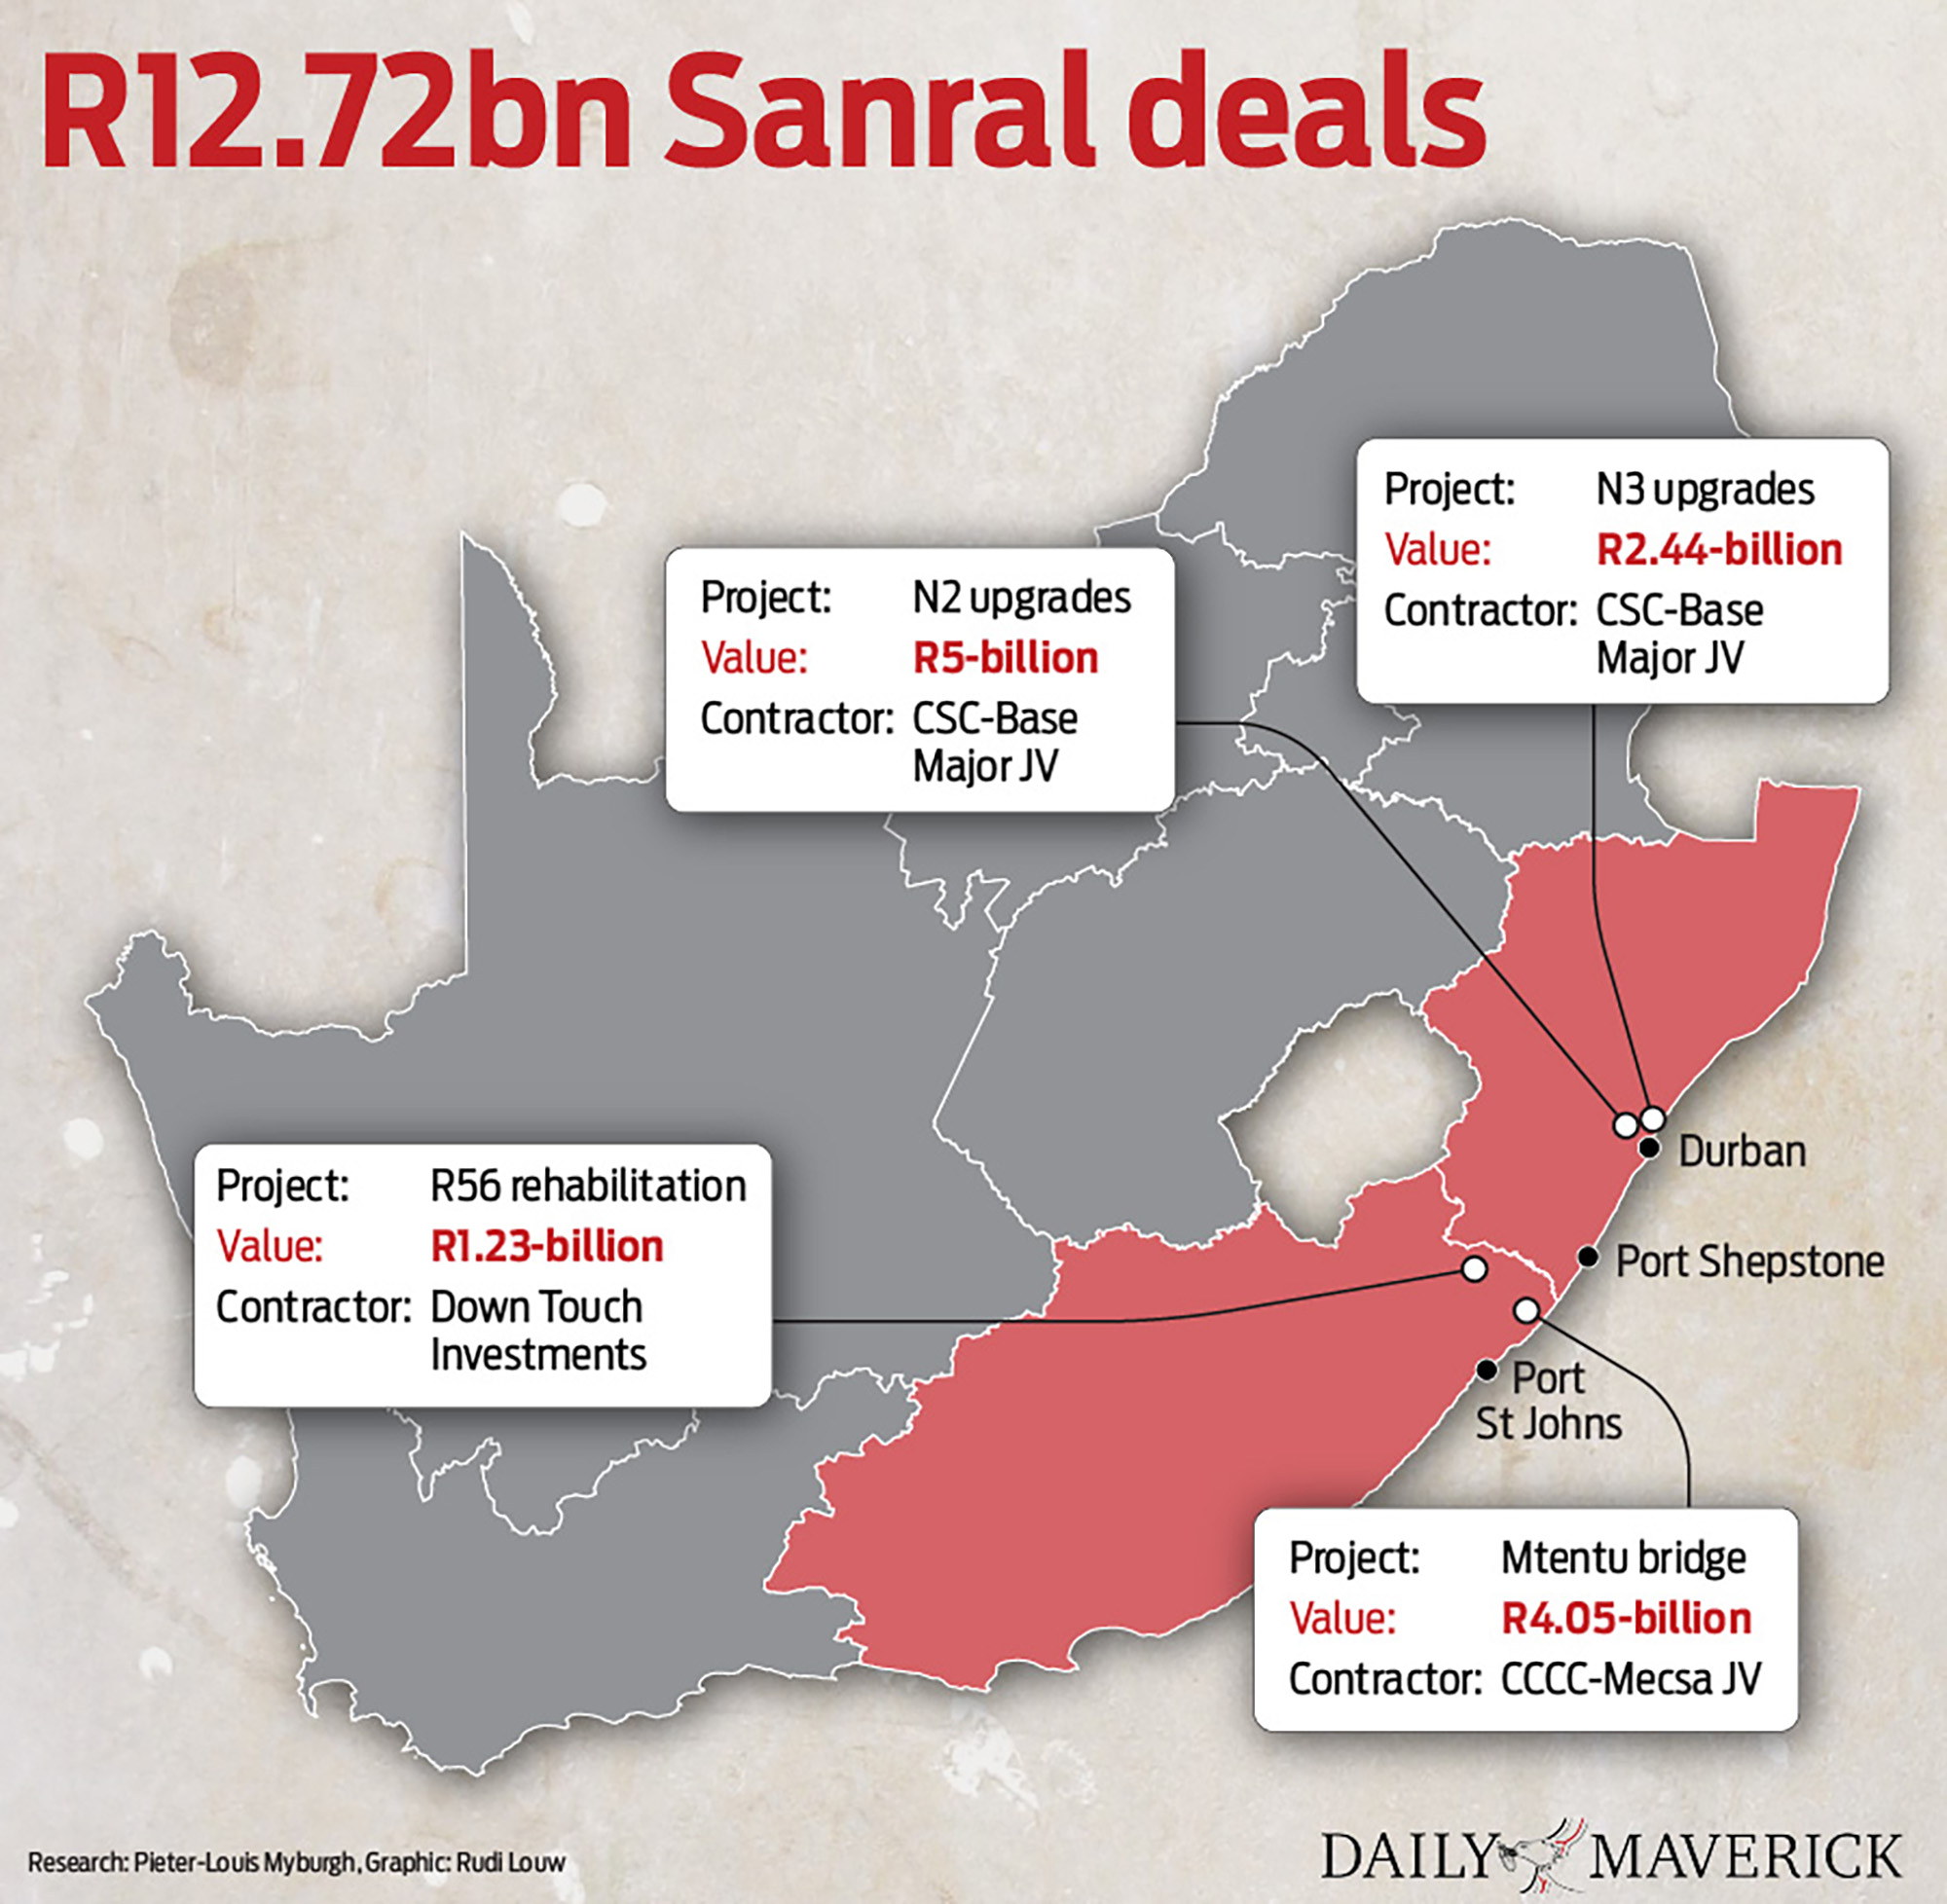 The location of Sanral's planned Mtentu bridge in the Eastern Cape.